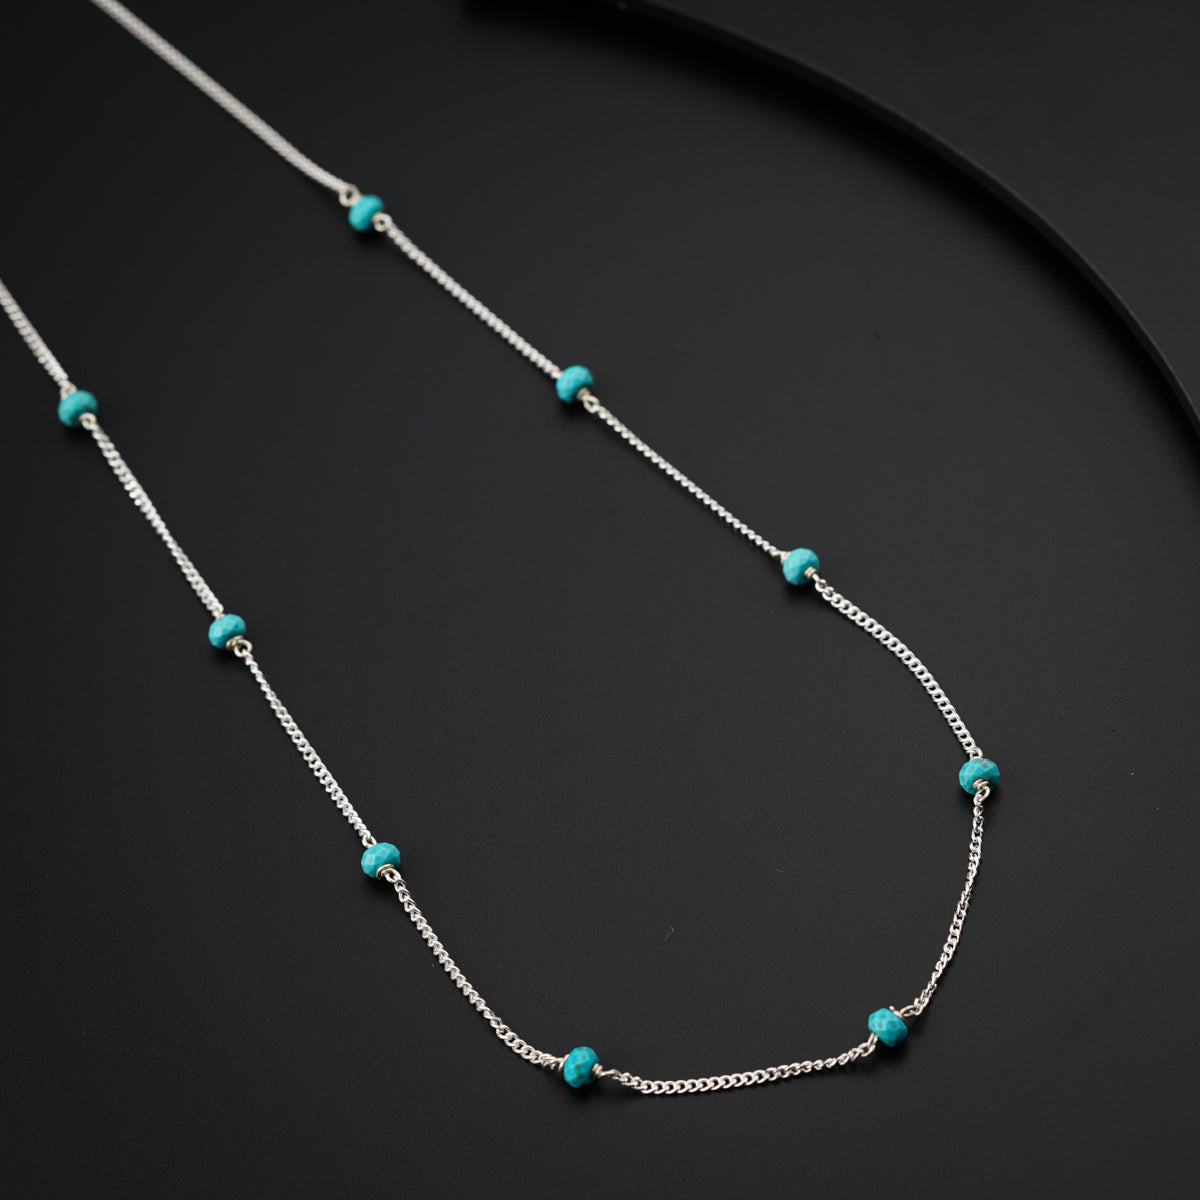 a necklace with turquoise beads on a black surface